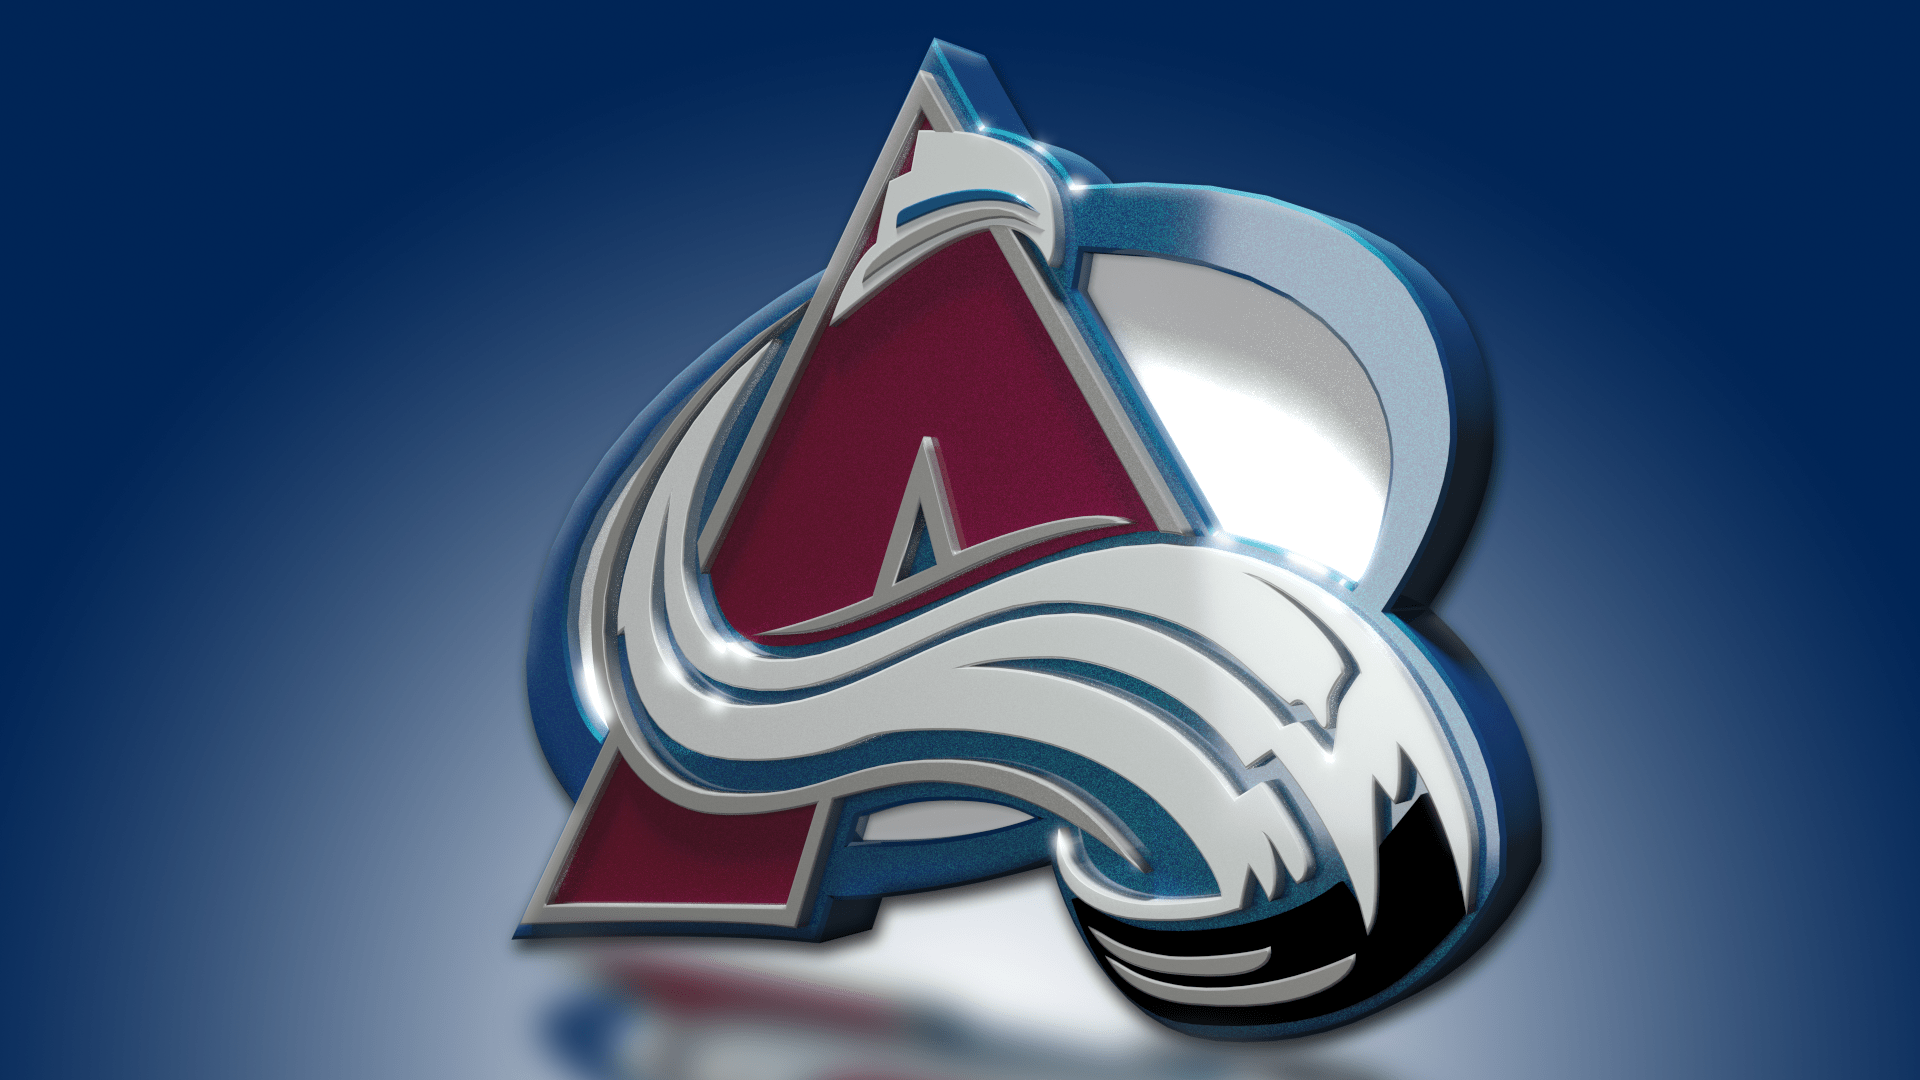 NEW WALLPAPERS! 👍 or 👎 - Colorado Avalanche